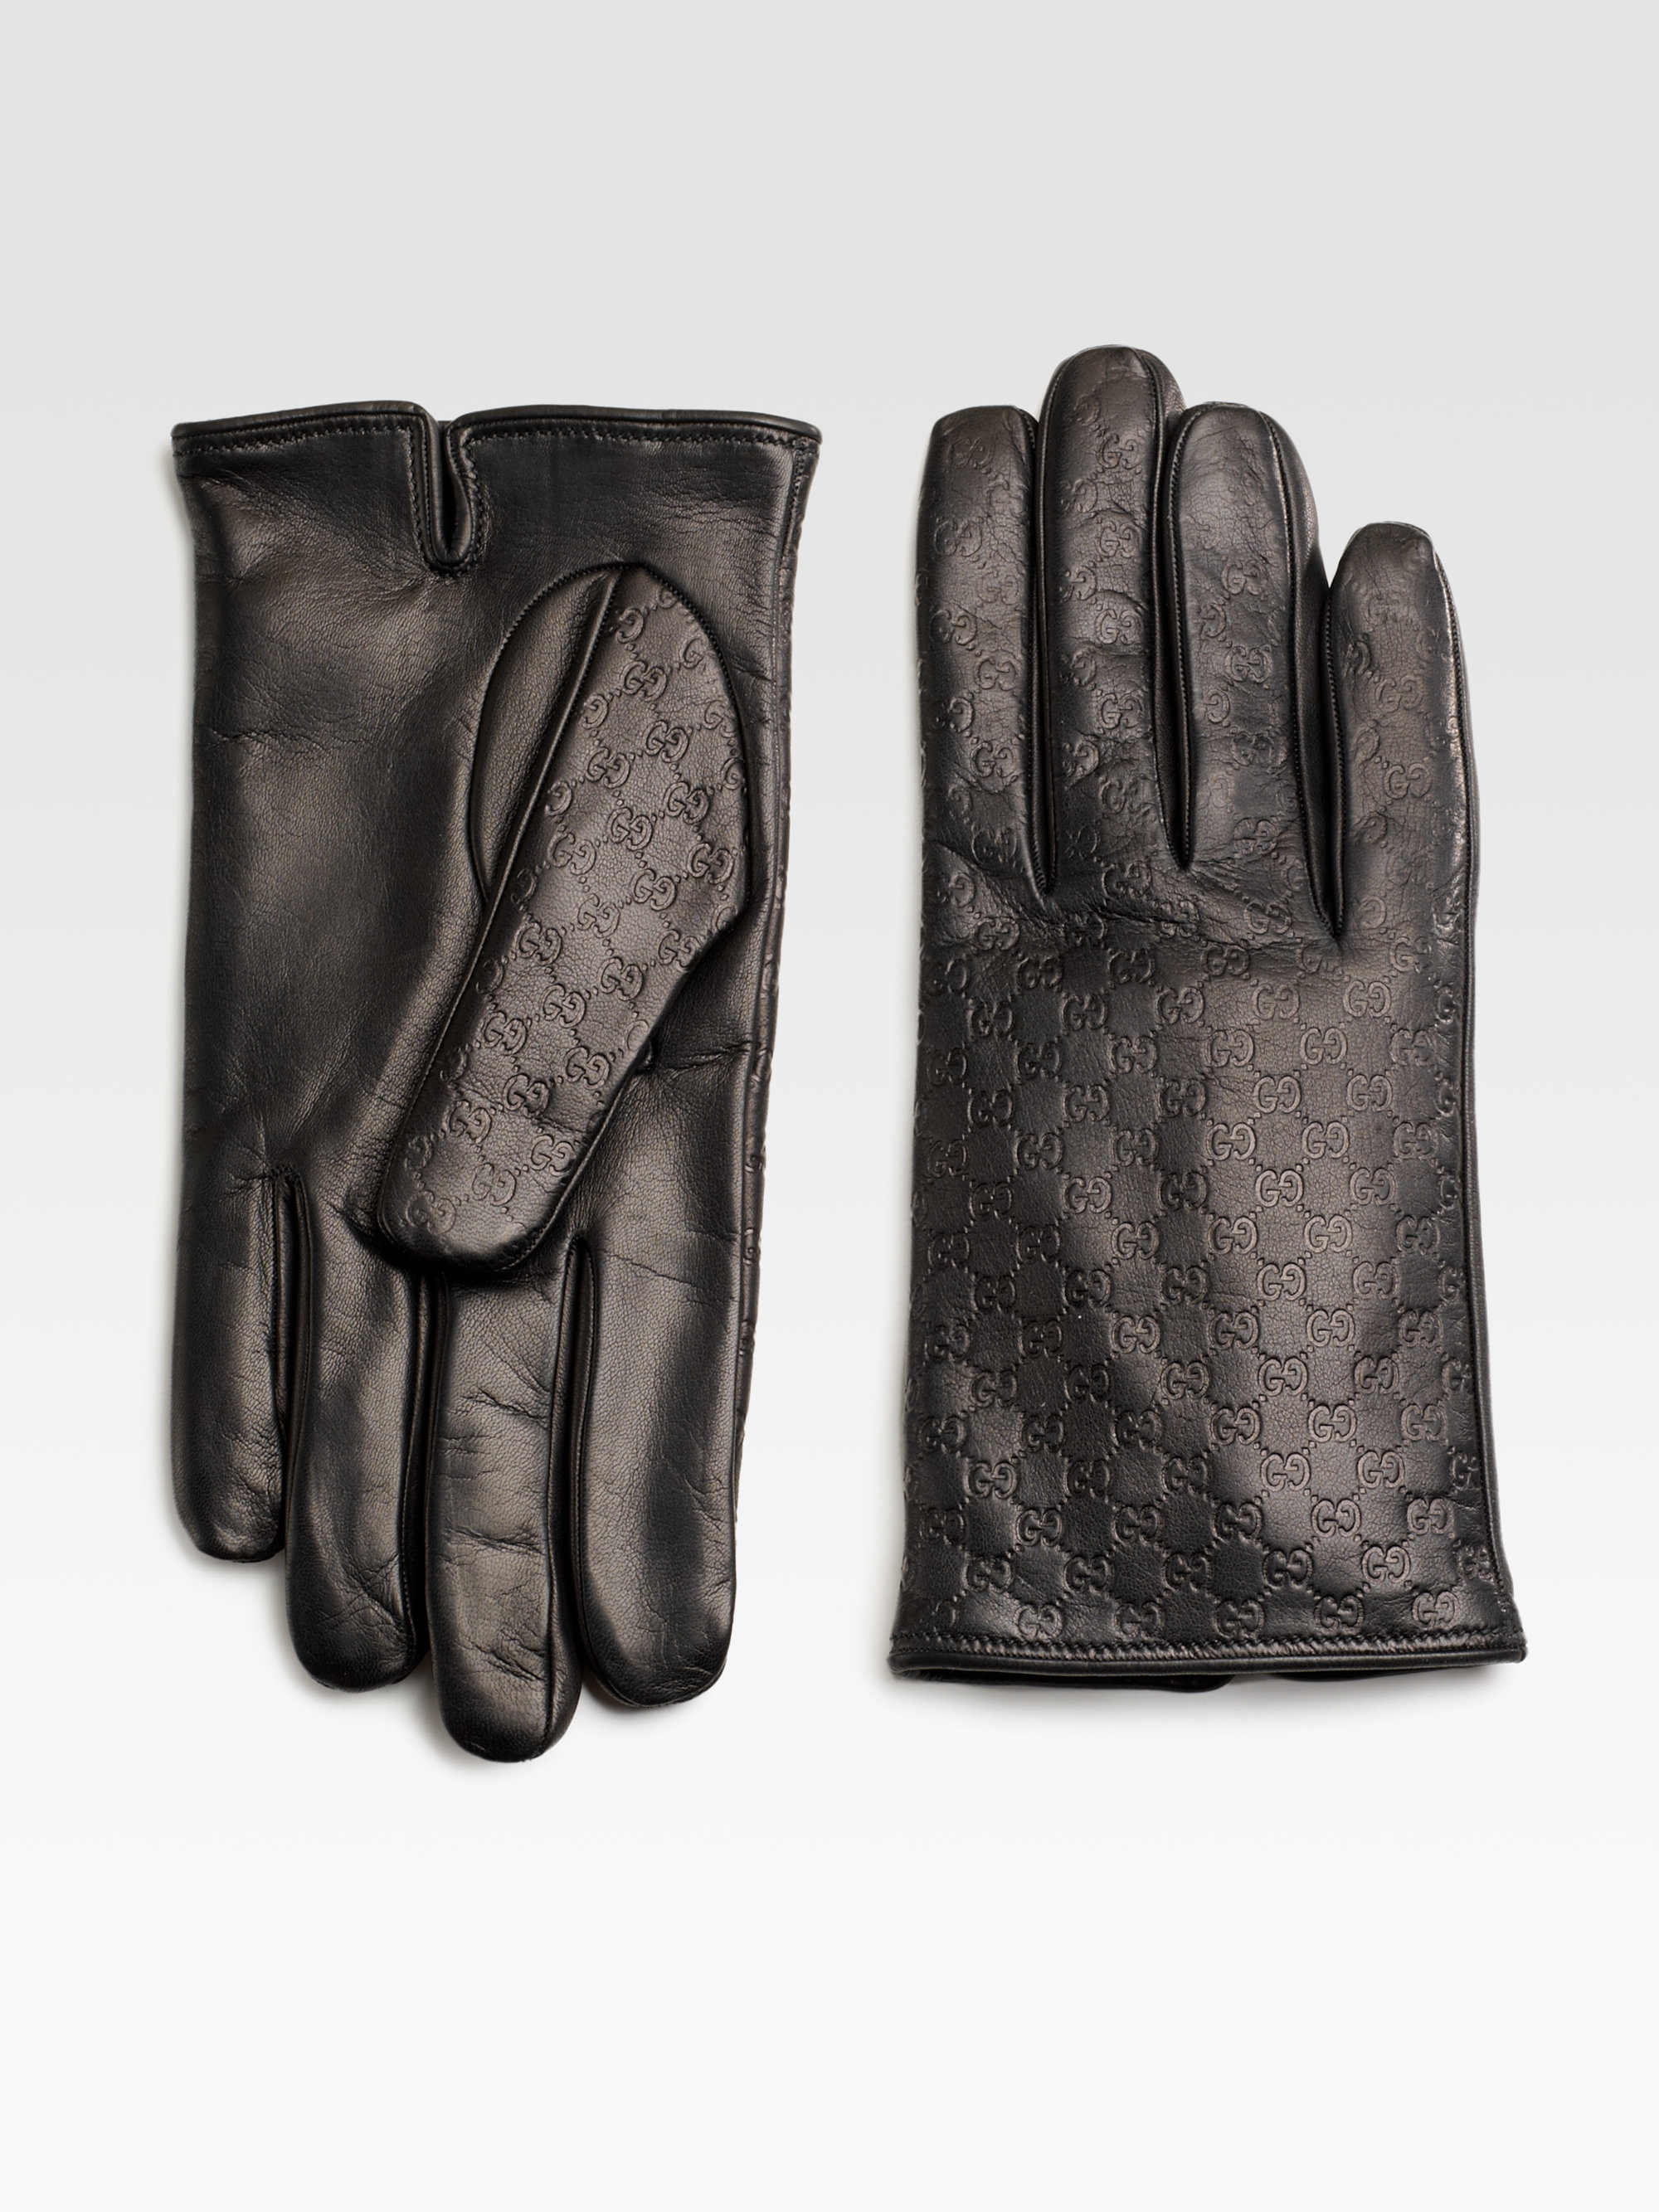 Gucci Microsima Leather Gloves in Cocoa (Brown) for Men - Lyst